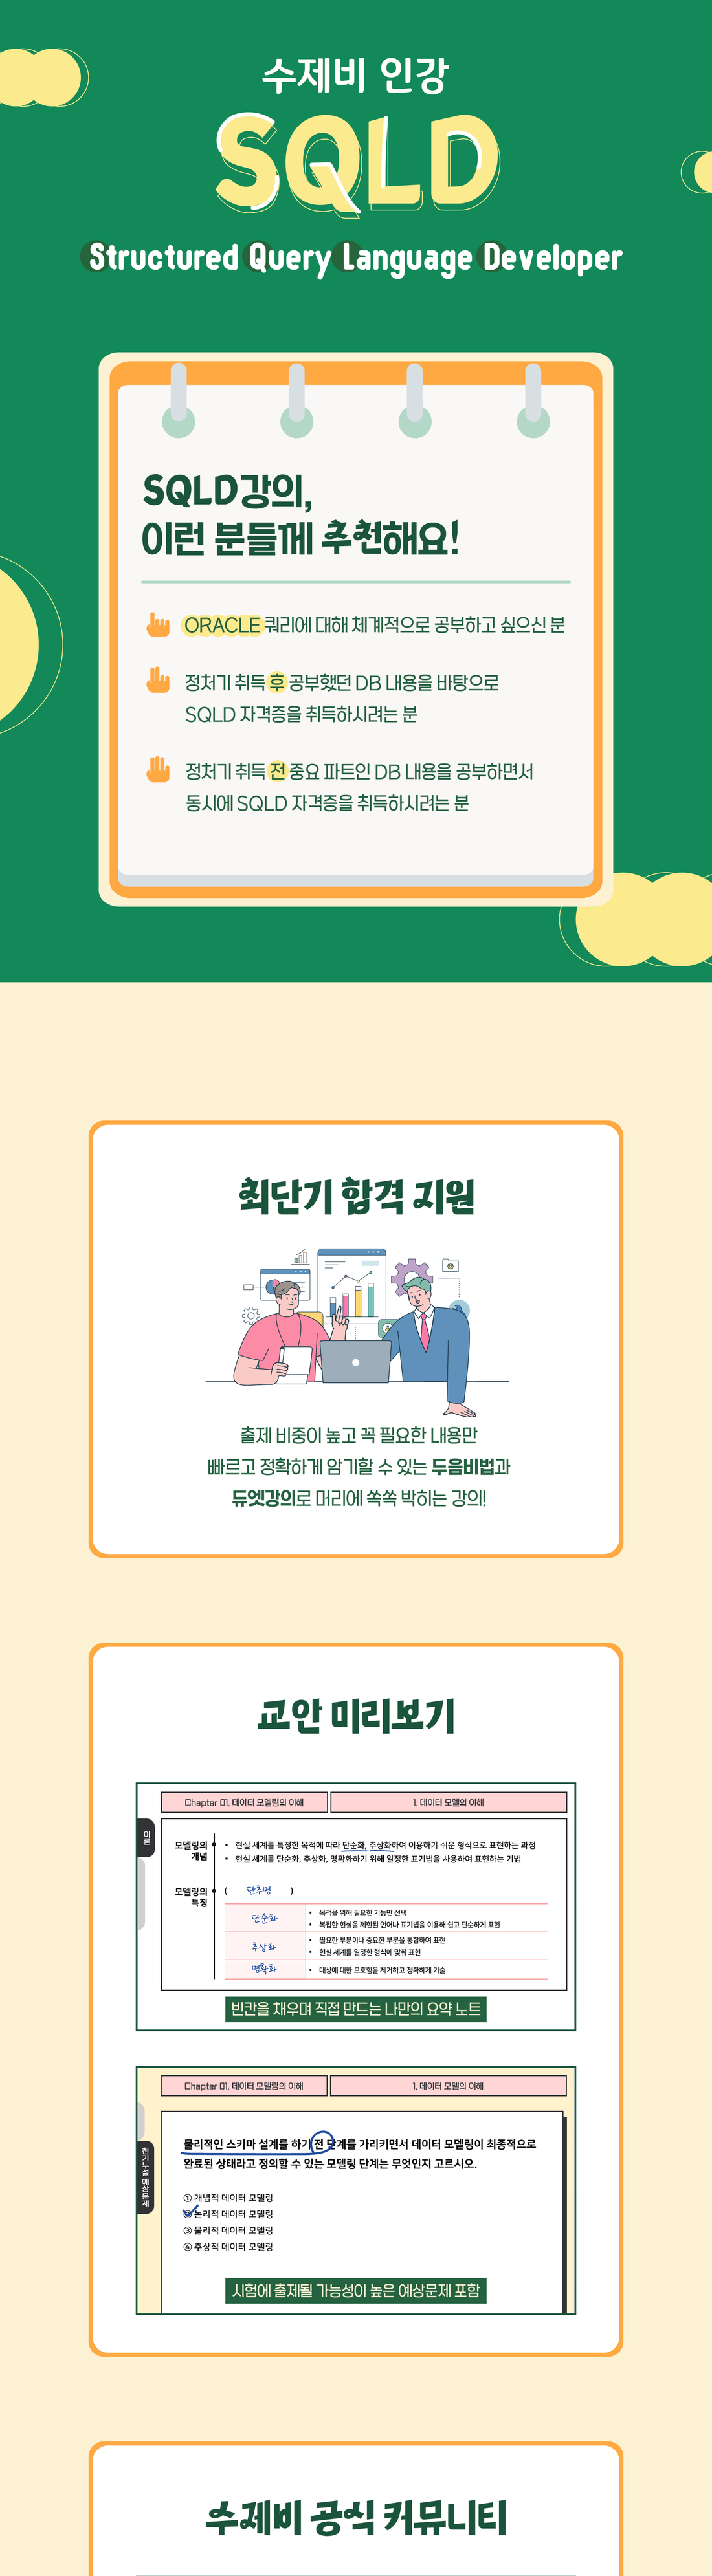 n)sqld_강좌소개-01(변경)_230720.png